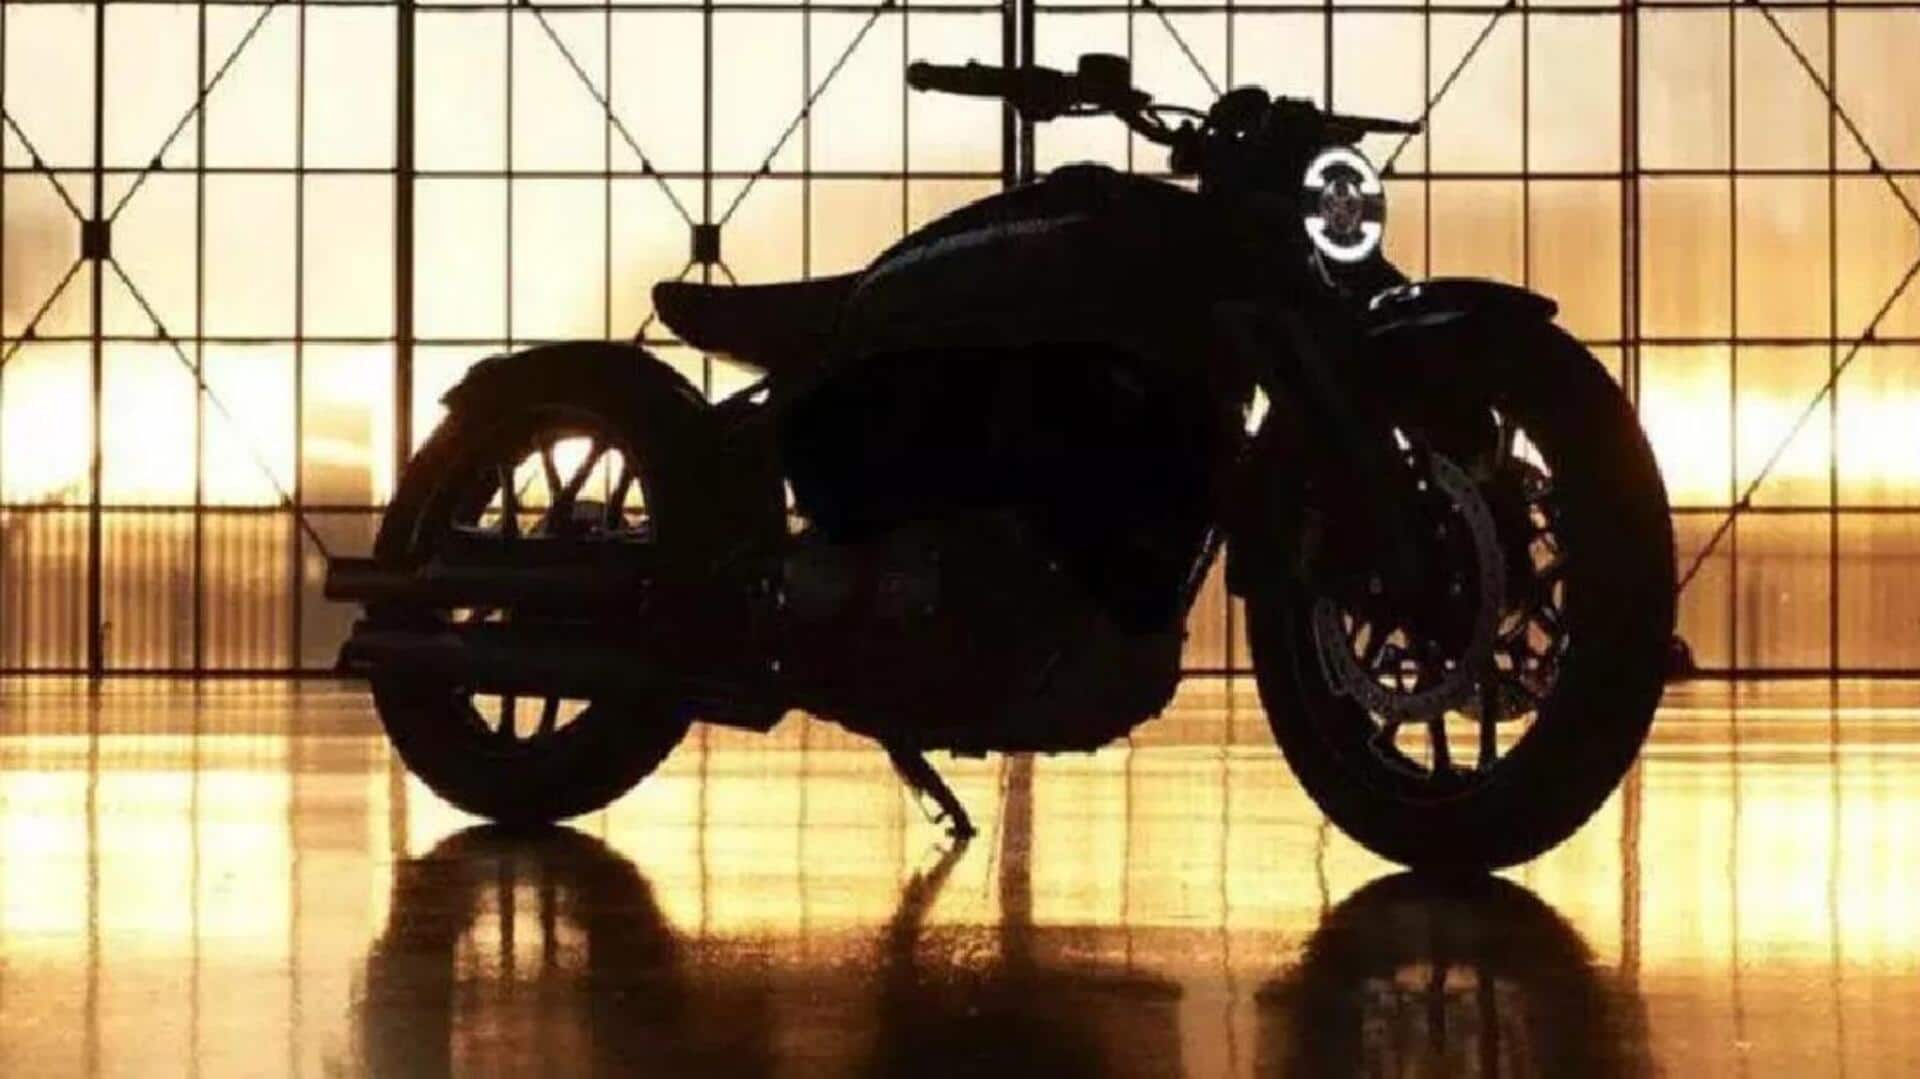 Royal Enfield to unveil Guerrilla 450 next month: Expected features